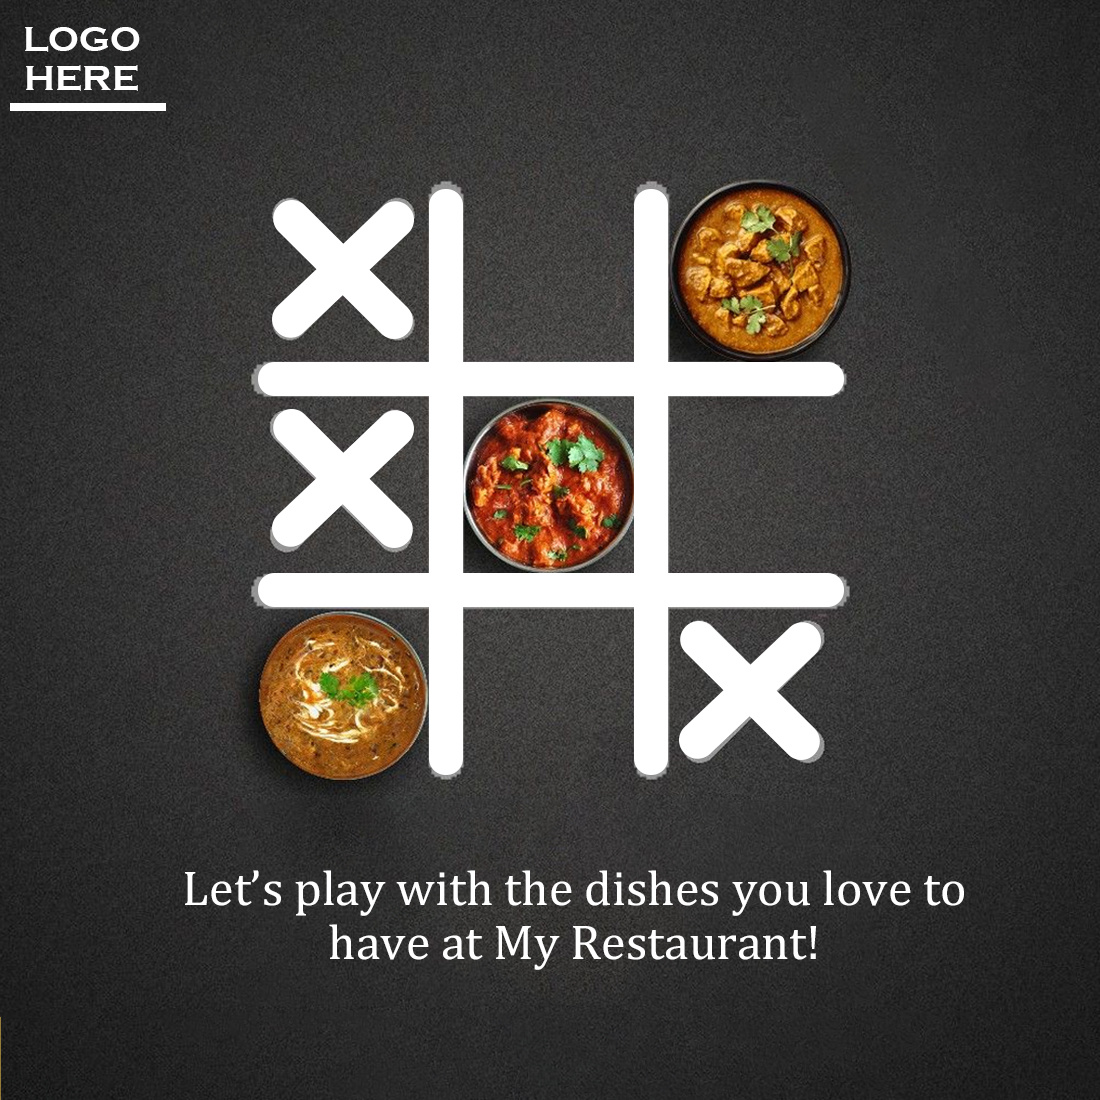 Food Social Media Campaign preview image.